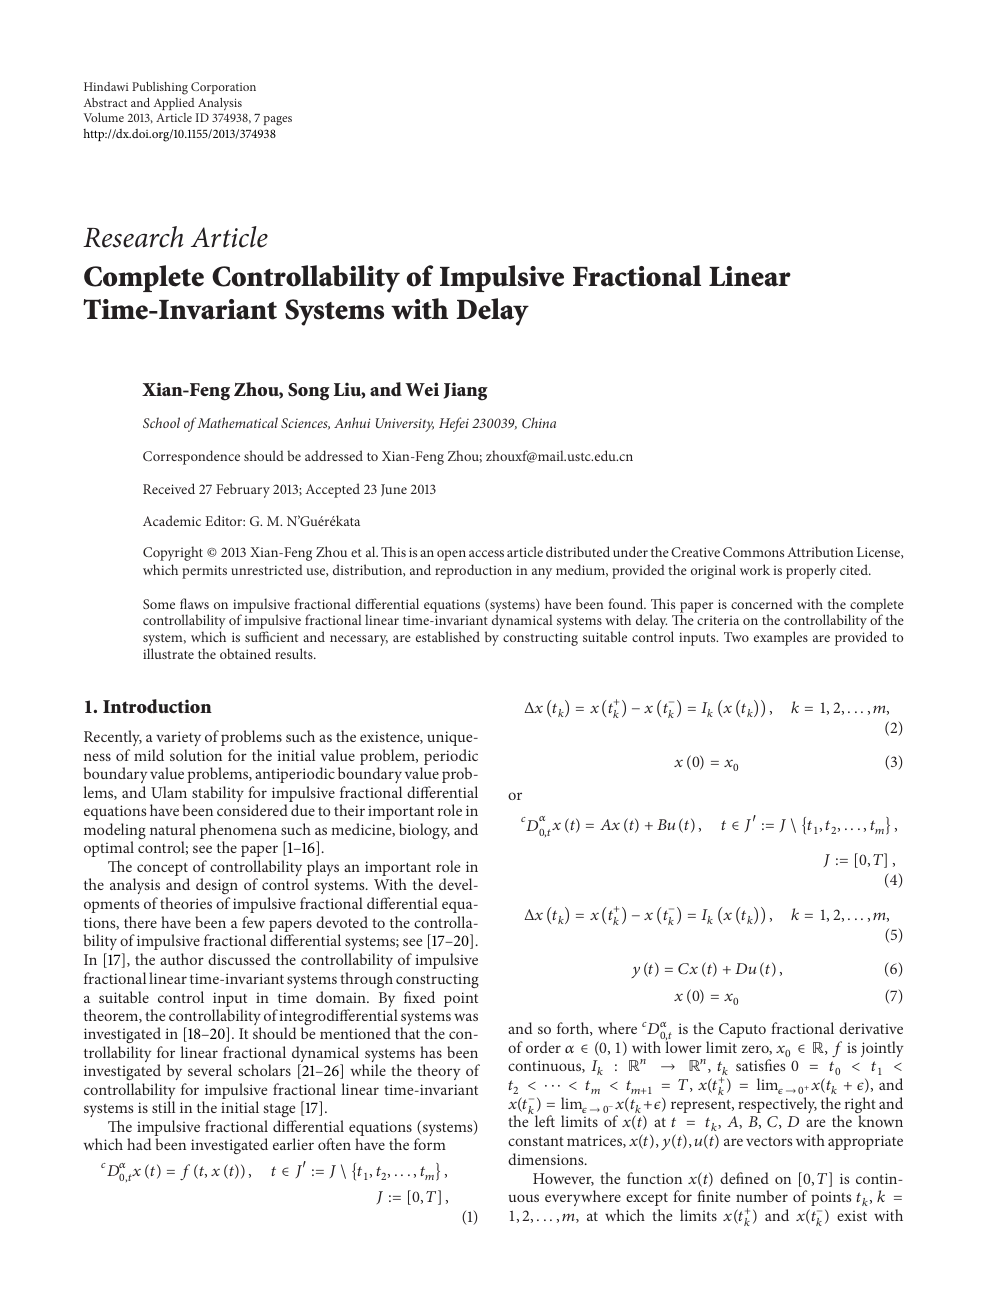 Complete Controllability Of Impulsive Fractional Linear Time Invariant Systems With Delay Topic Of Research Paper In Mathematics Download Scholarly Article Pdf And Read For Free On Cyberleninka Open Science Hub